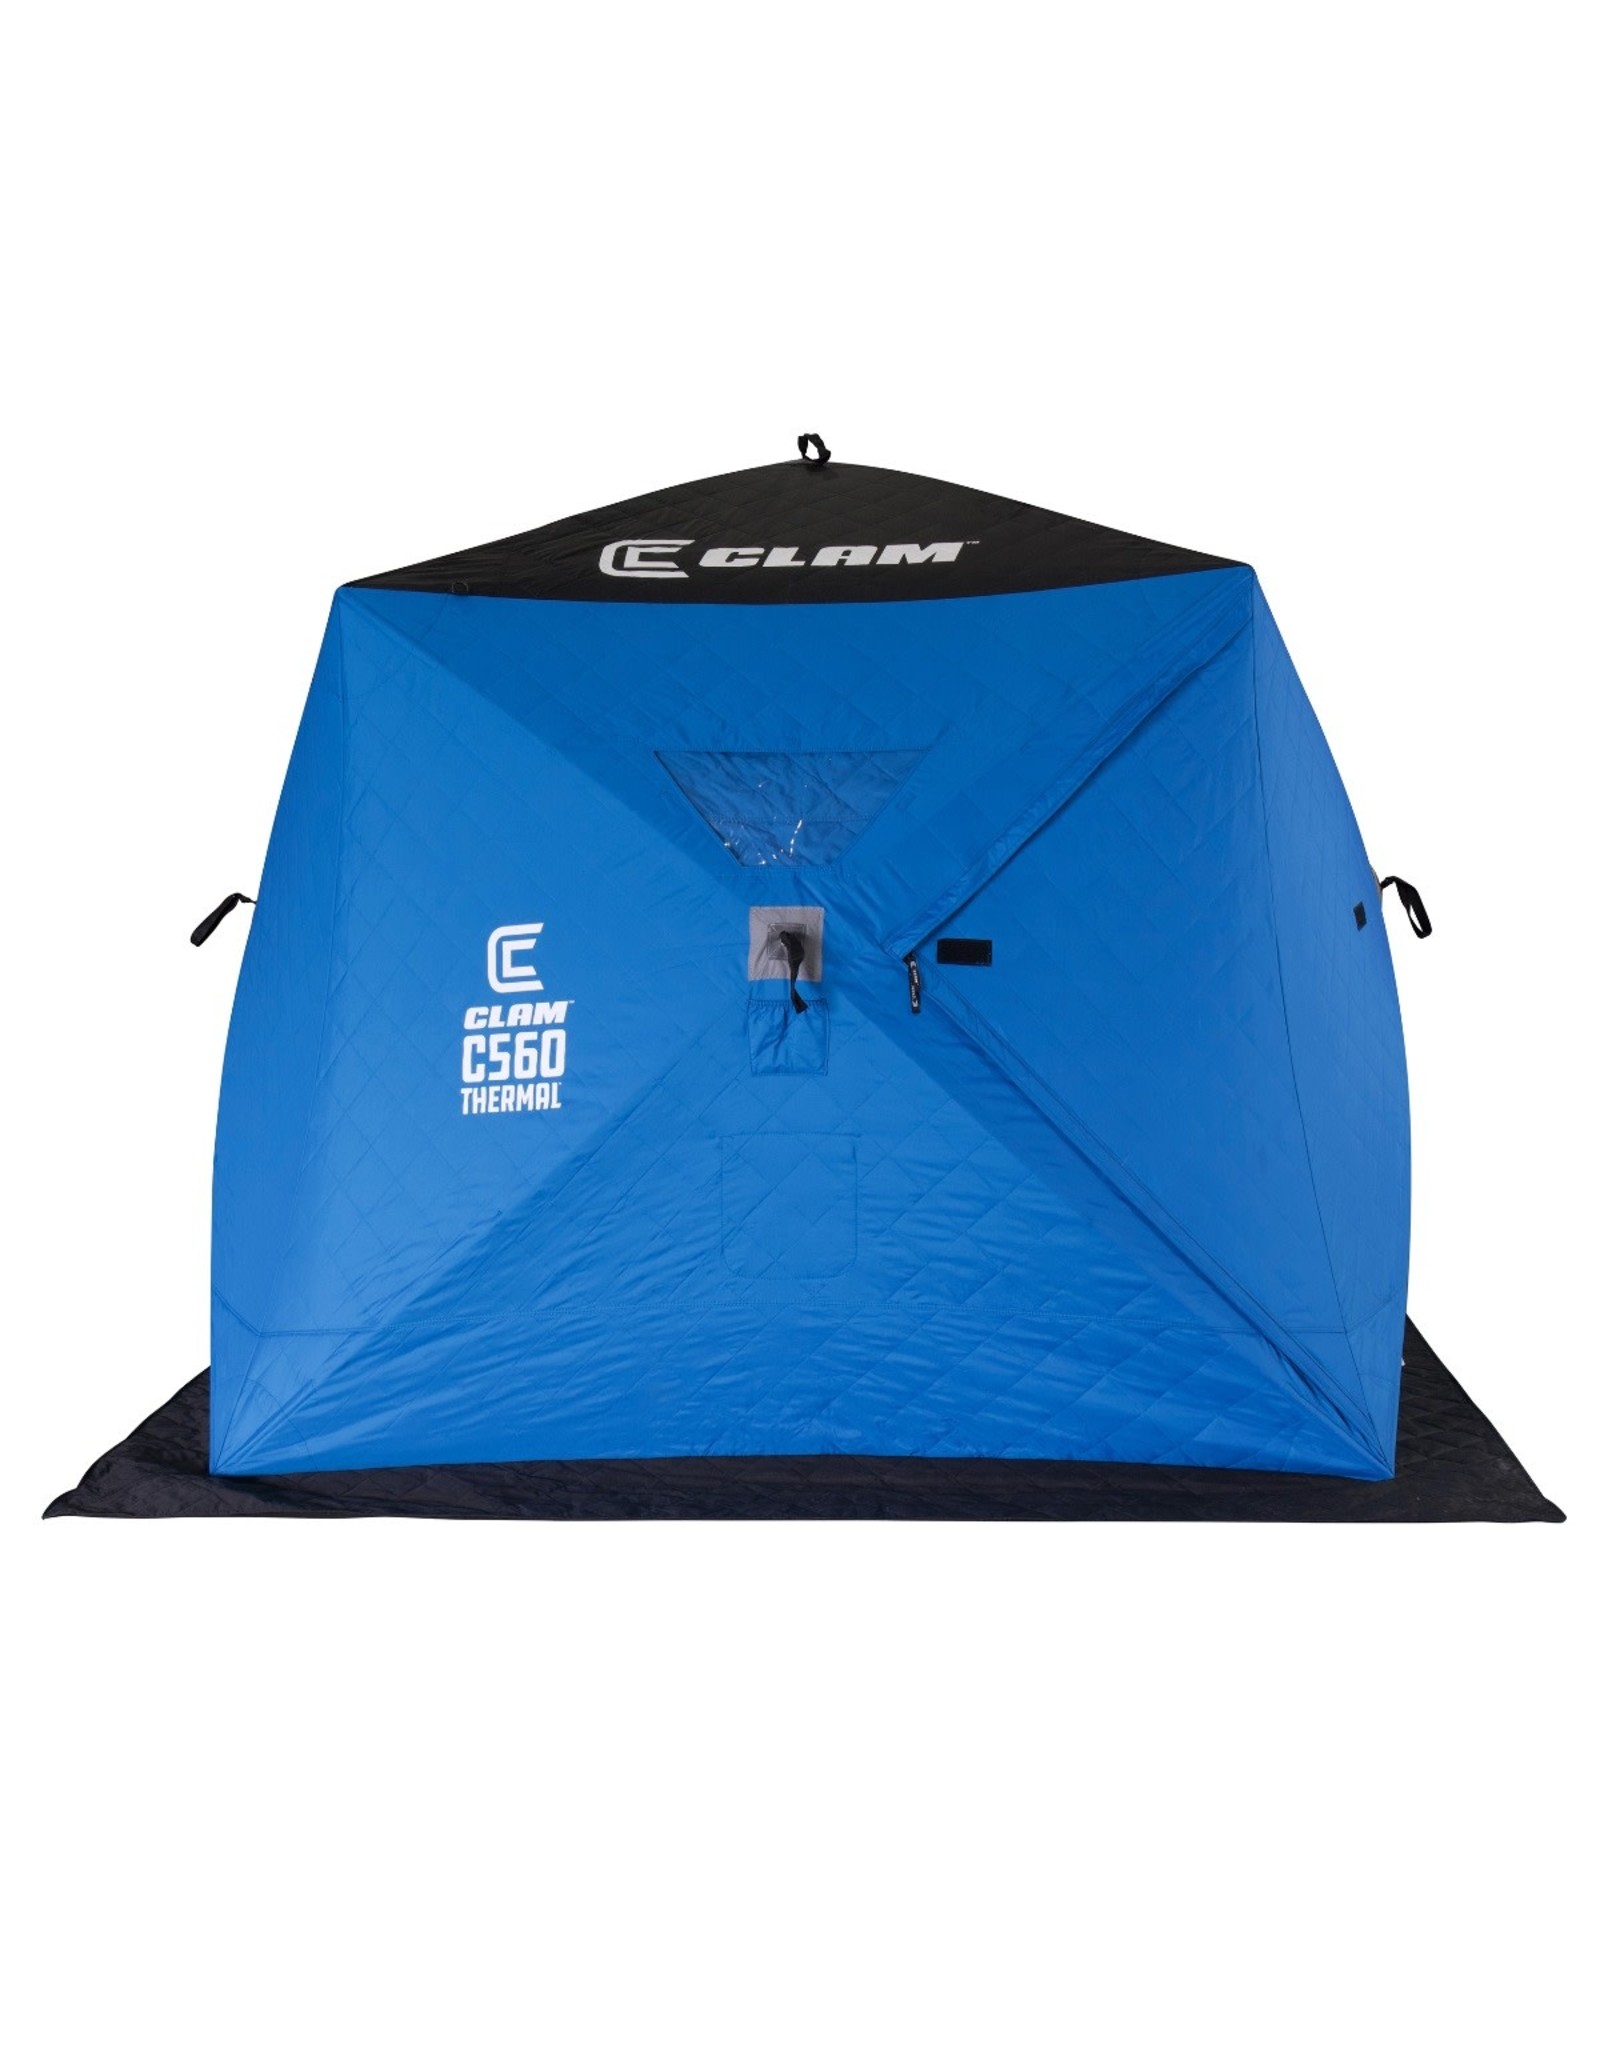 Clam Clam C-560 Thermal Hub Shelter